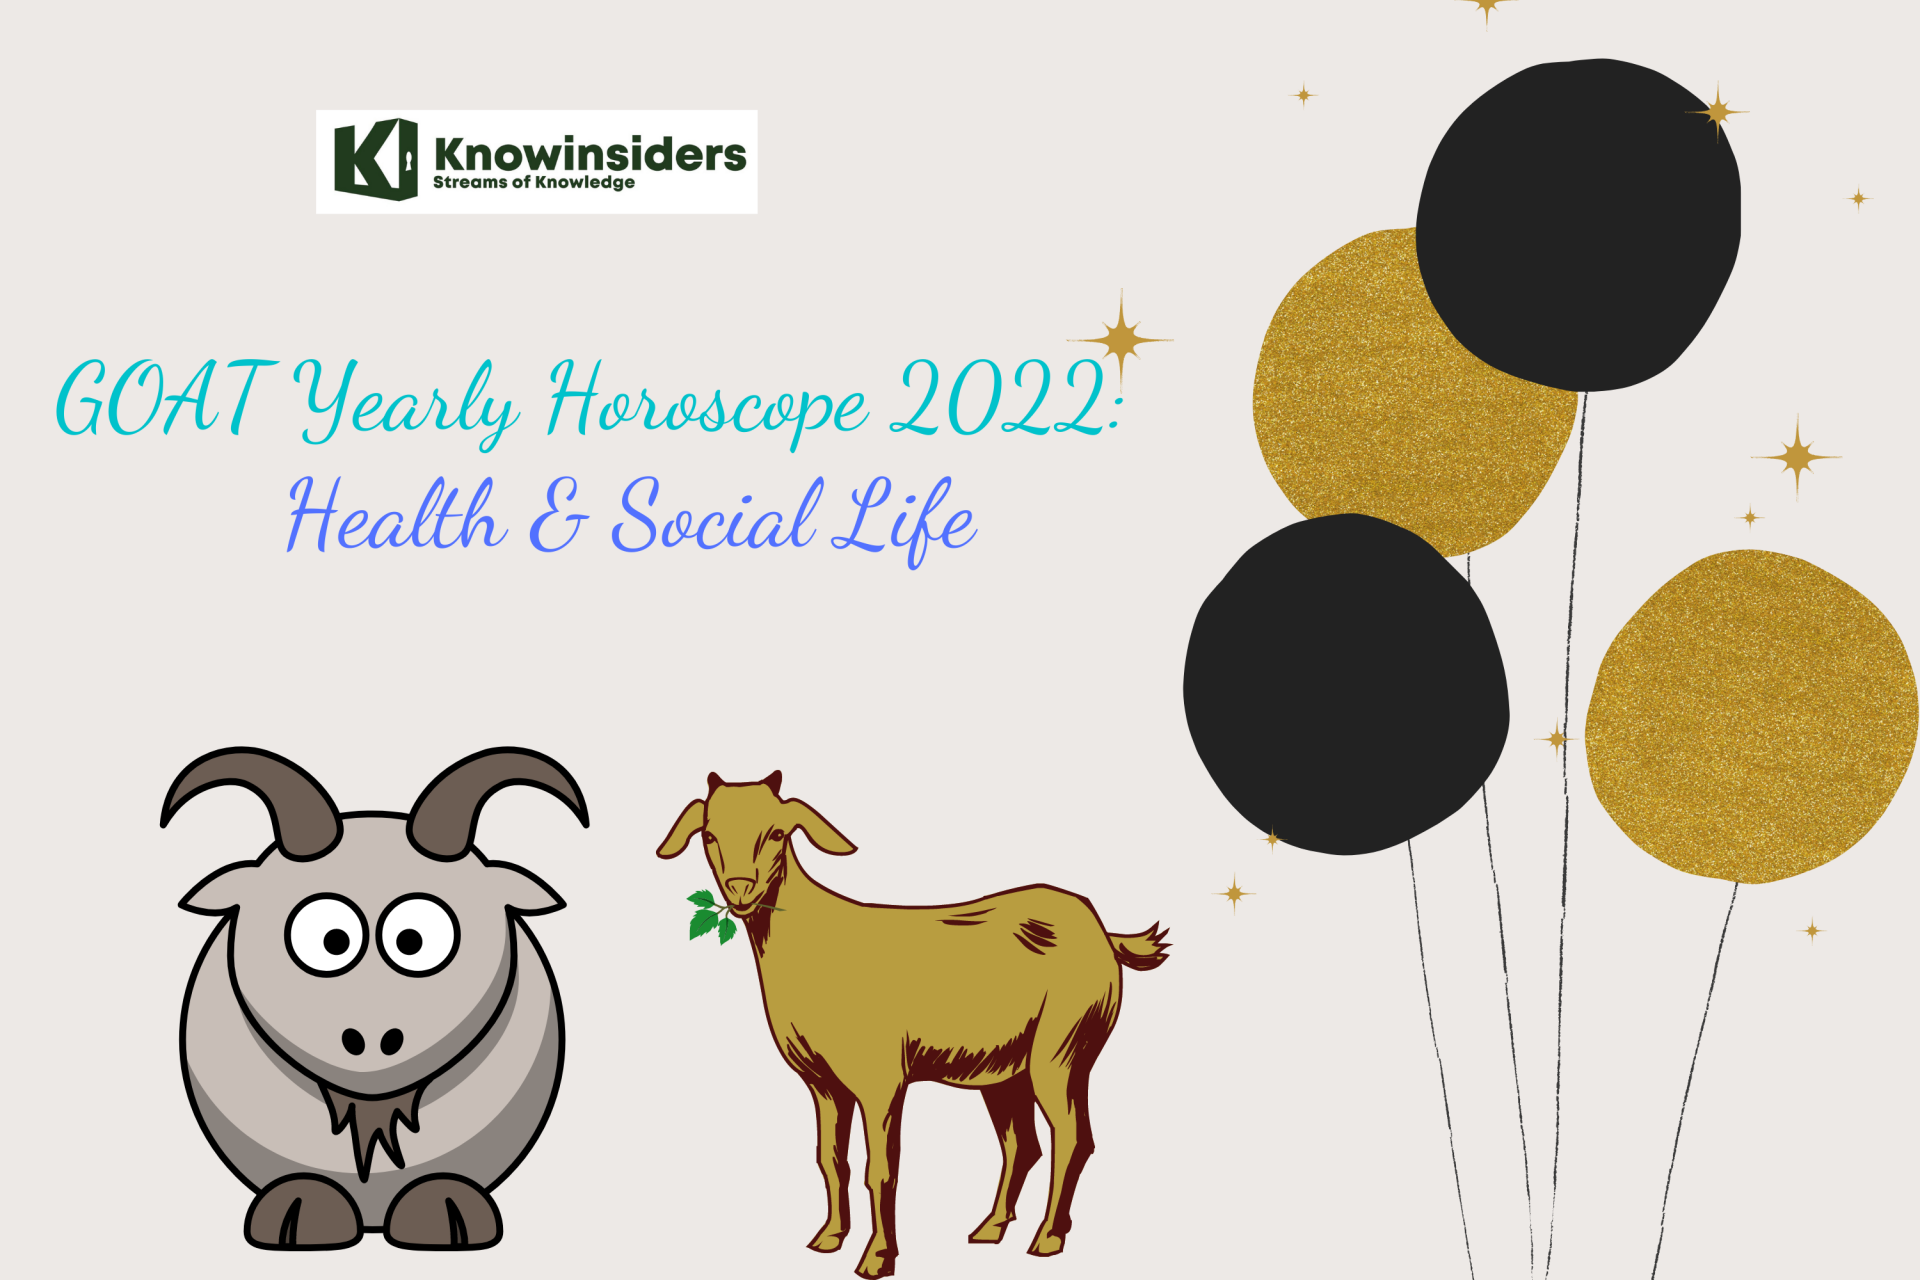 GOAT Yearly Horoscope 2022 – Feng Shui Prediction for Health, Social Life